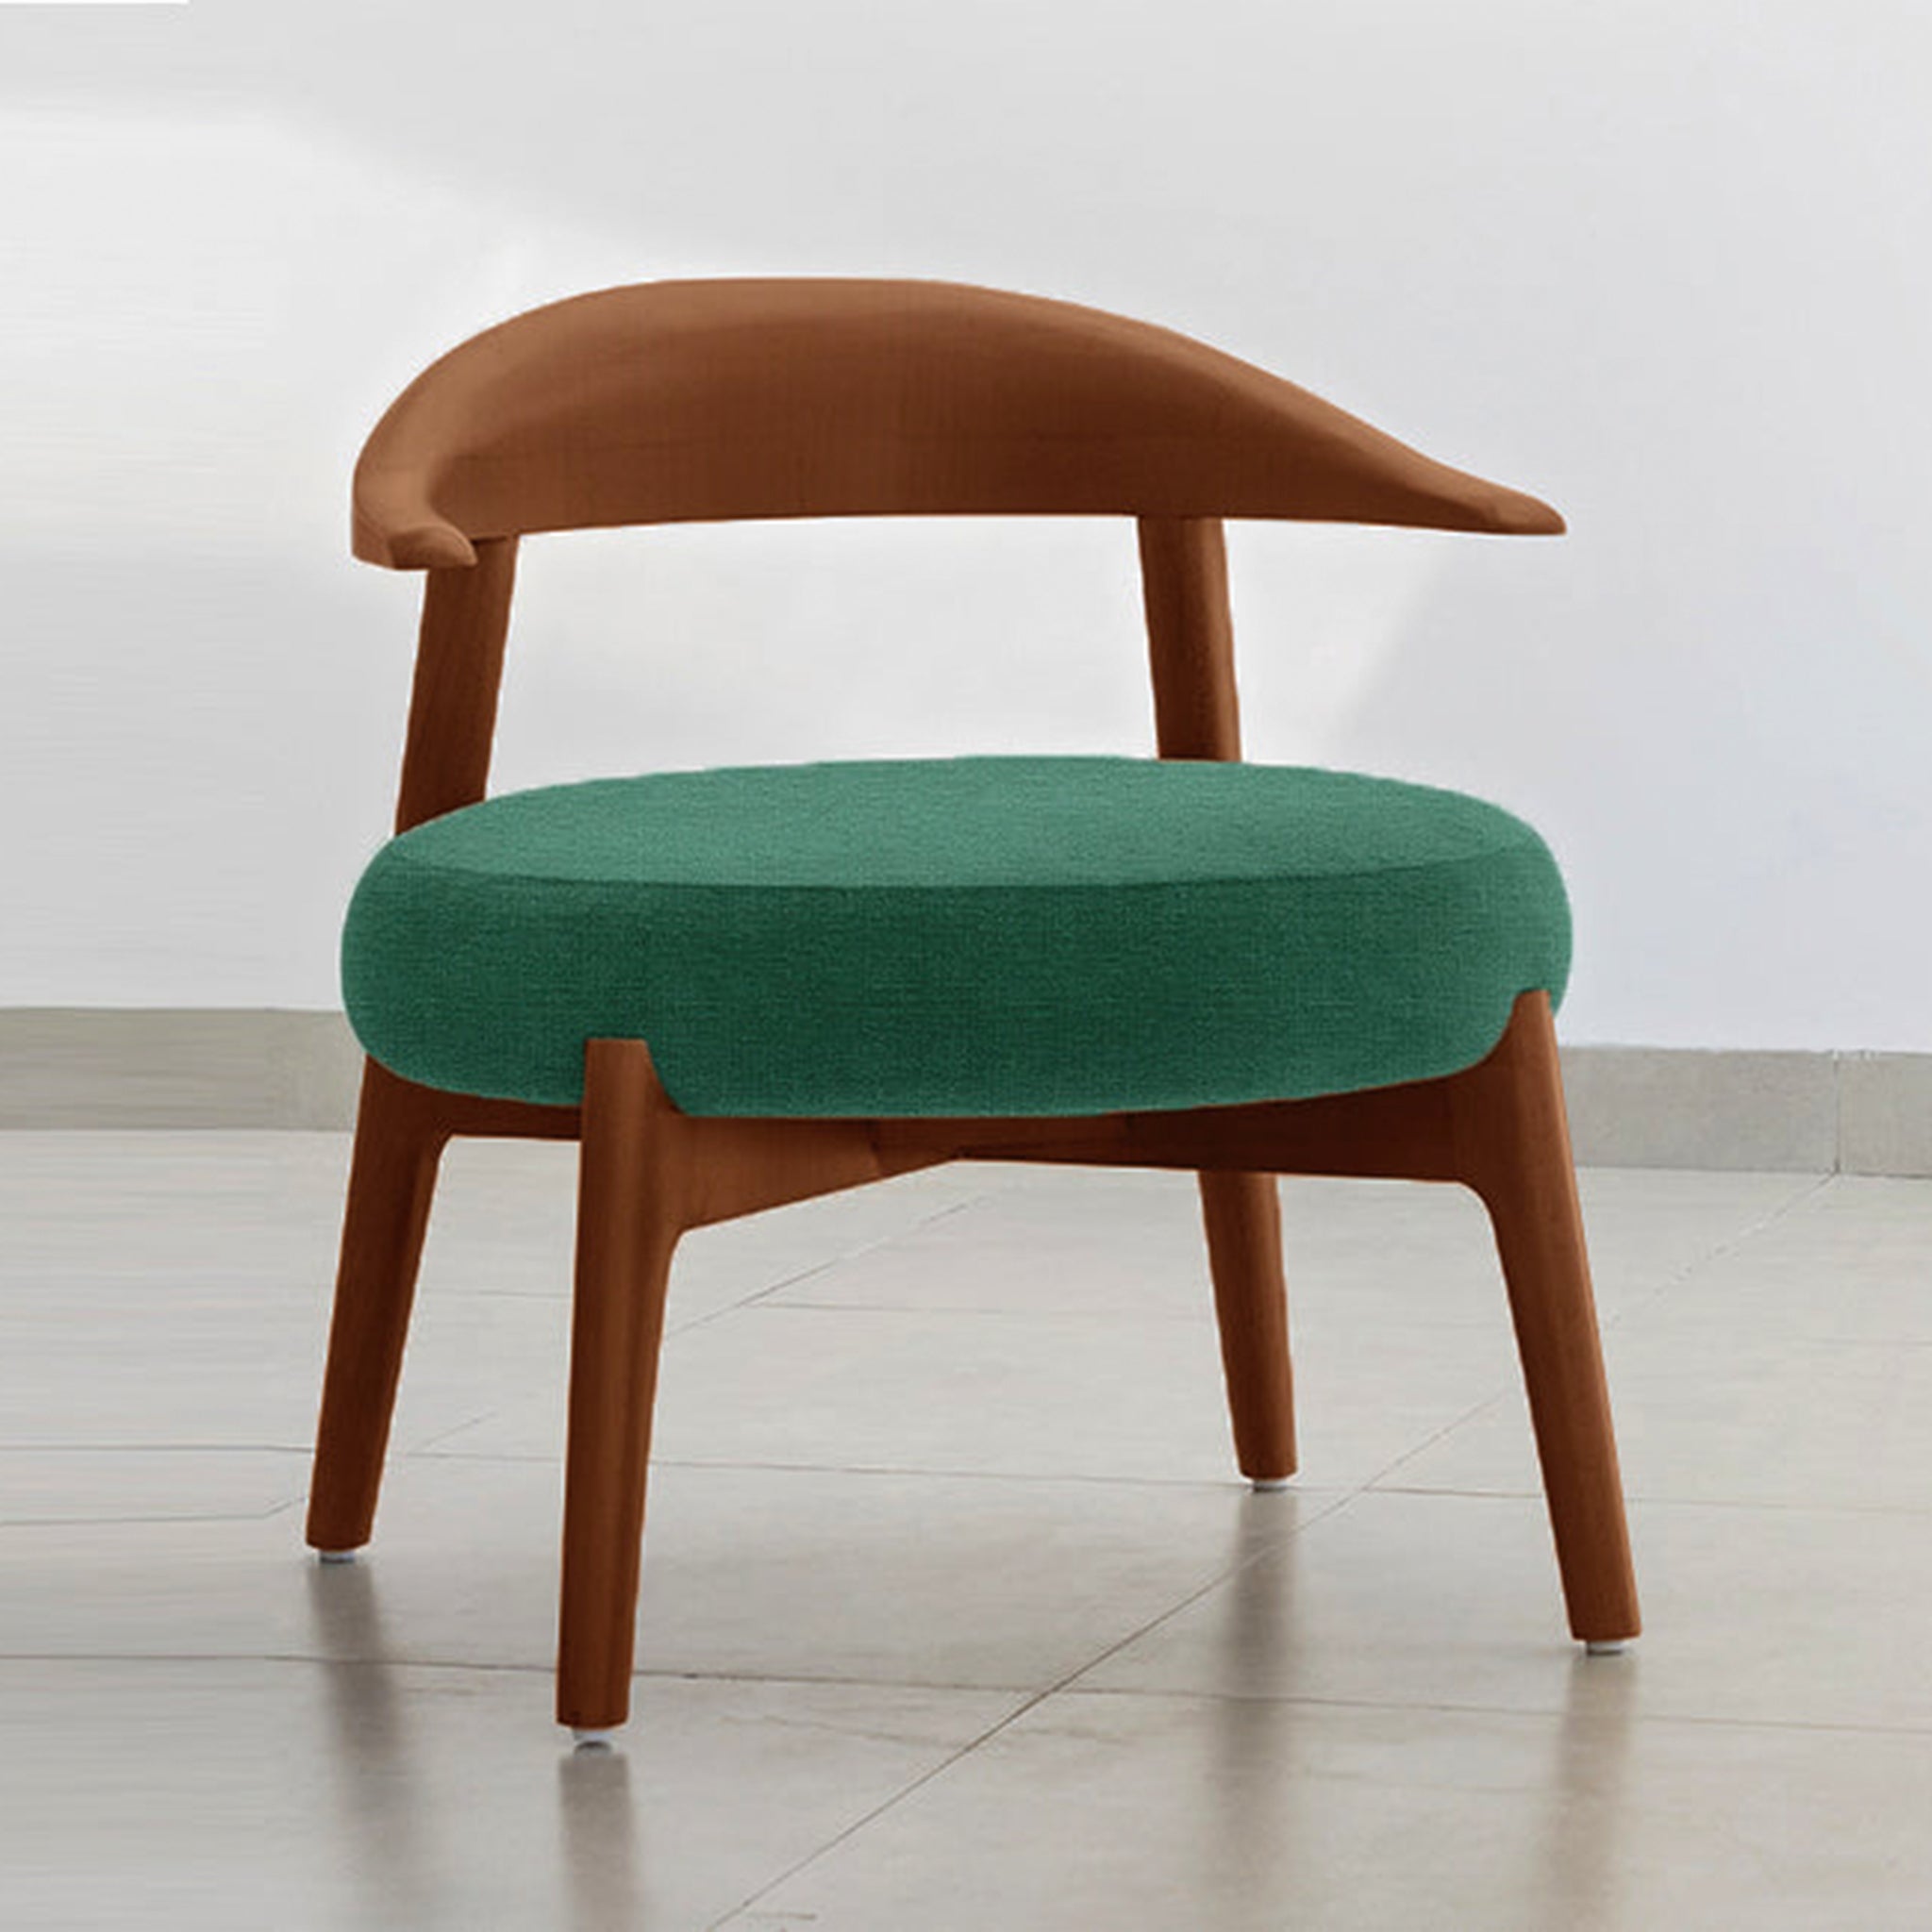 "Mid-century modern Hyde Accent Chair with unique wooden design"